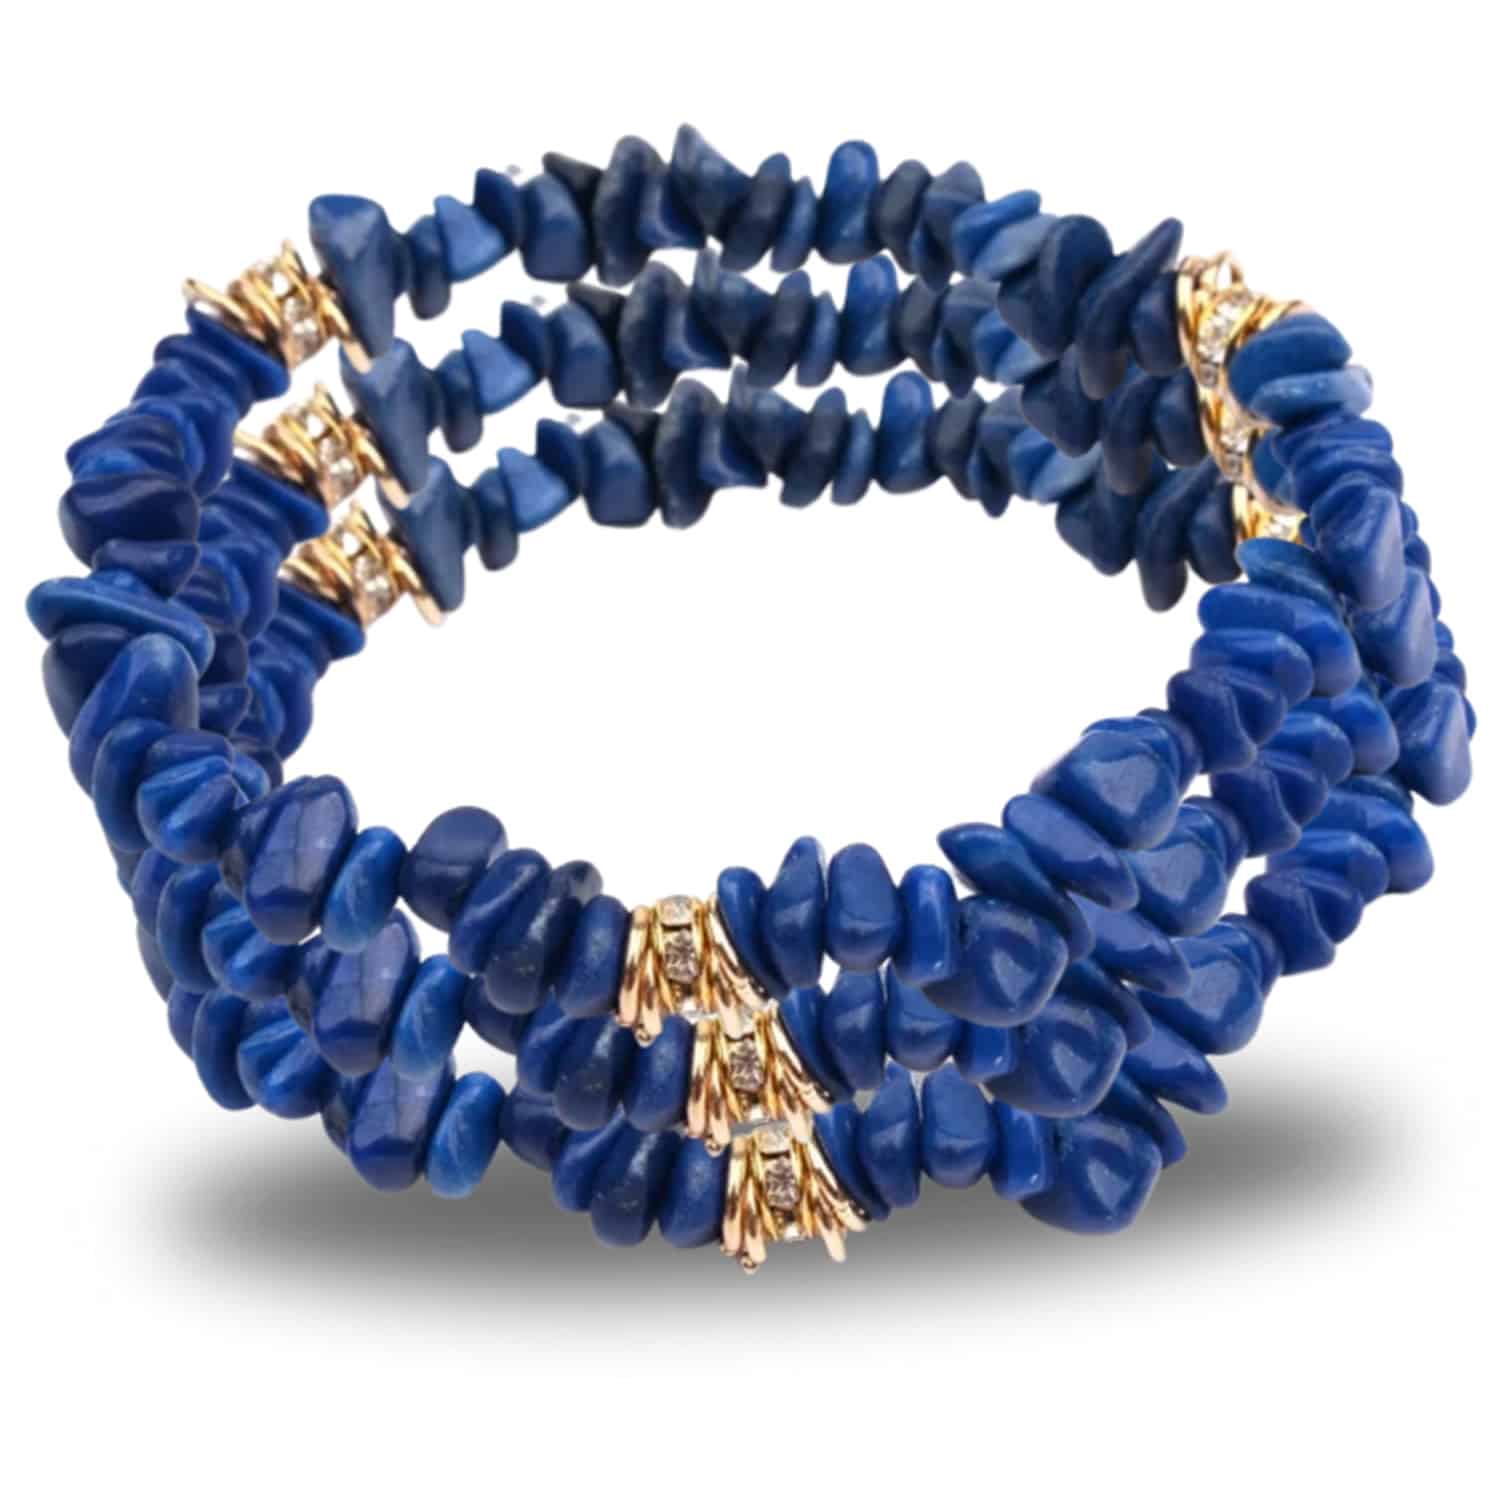 NAVY BLUE MARBLE LINK BRACELET WITH GOLD ACCENTS – brynn hudson